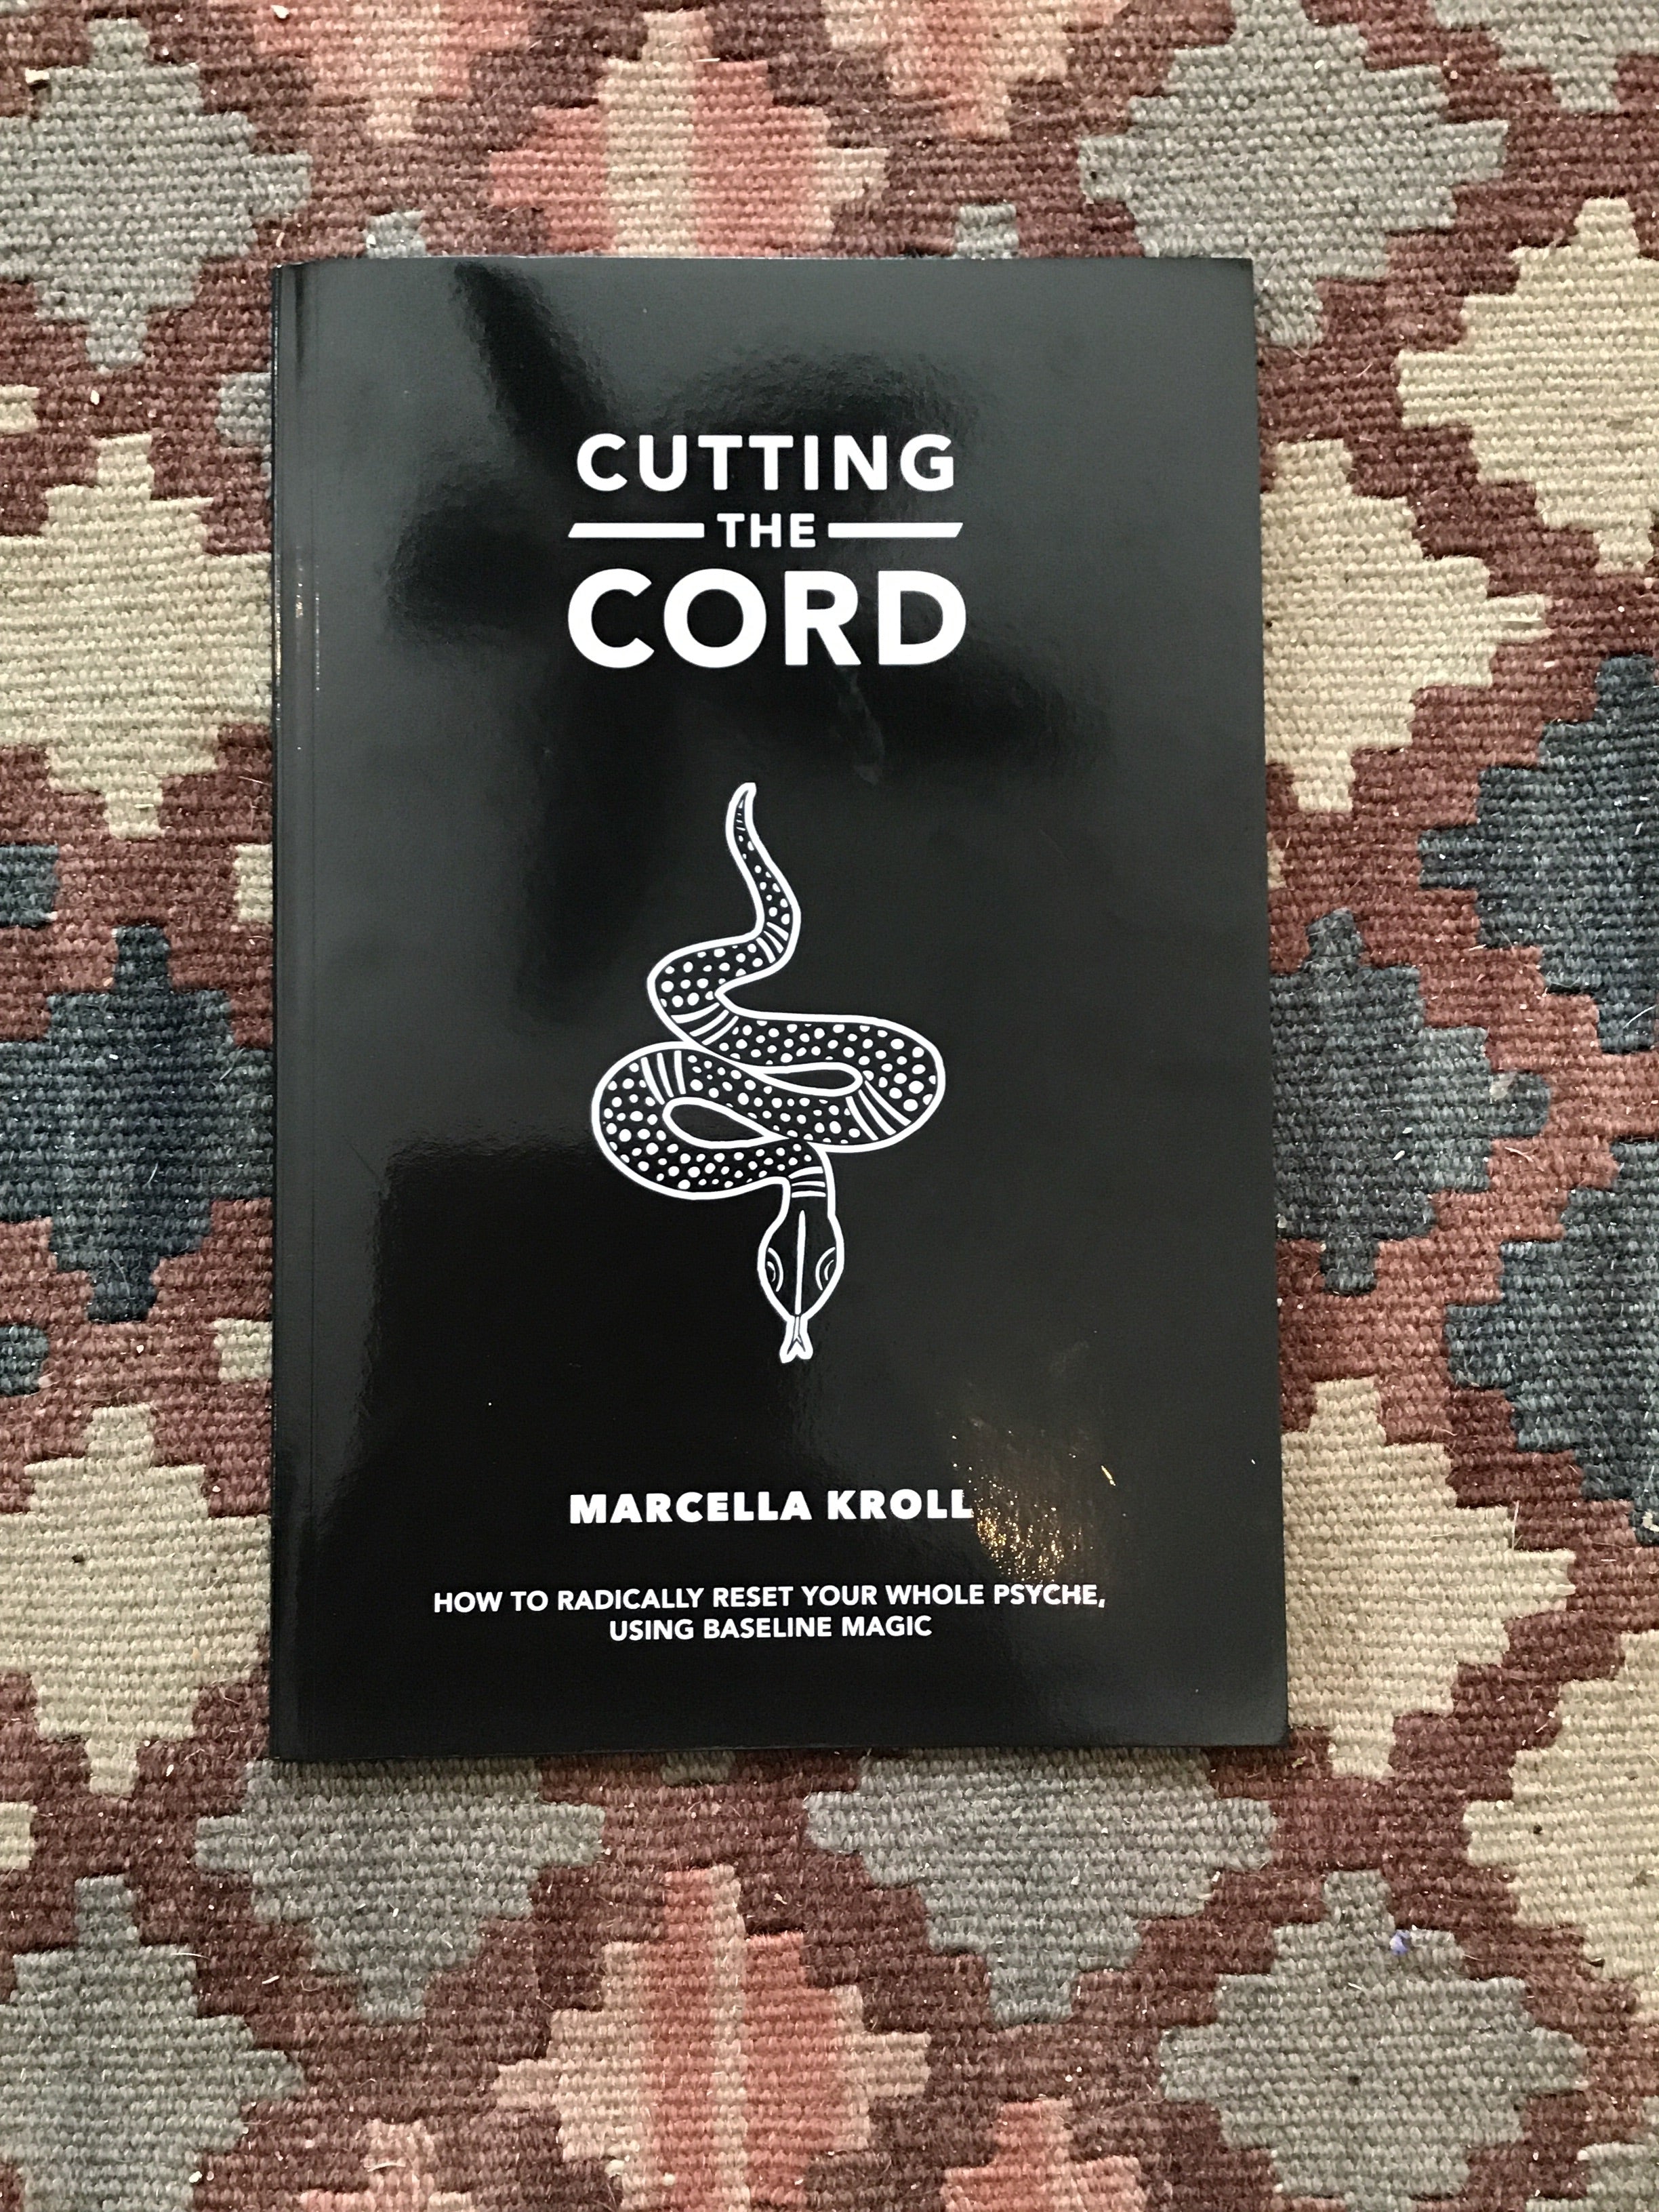 Cutting The Cord: How To Radically Reset Your Whole Psyche Using Baseline Magic